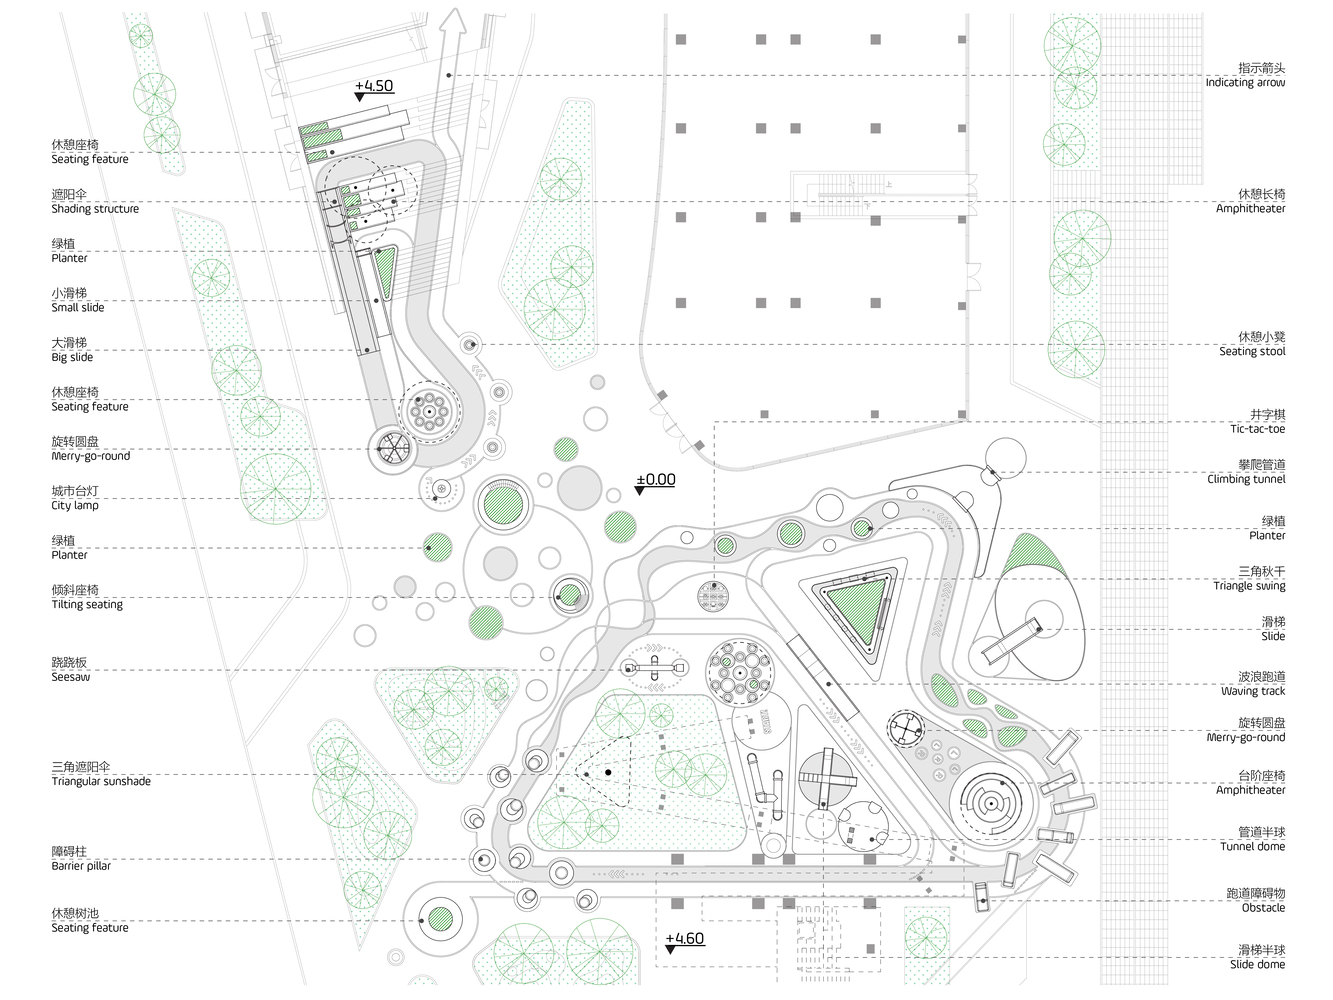 Magma Flow Public Space site plan, Source by 100 Architects